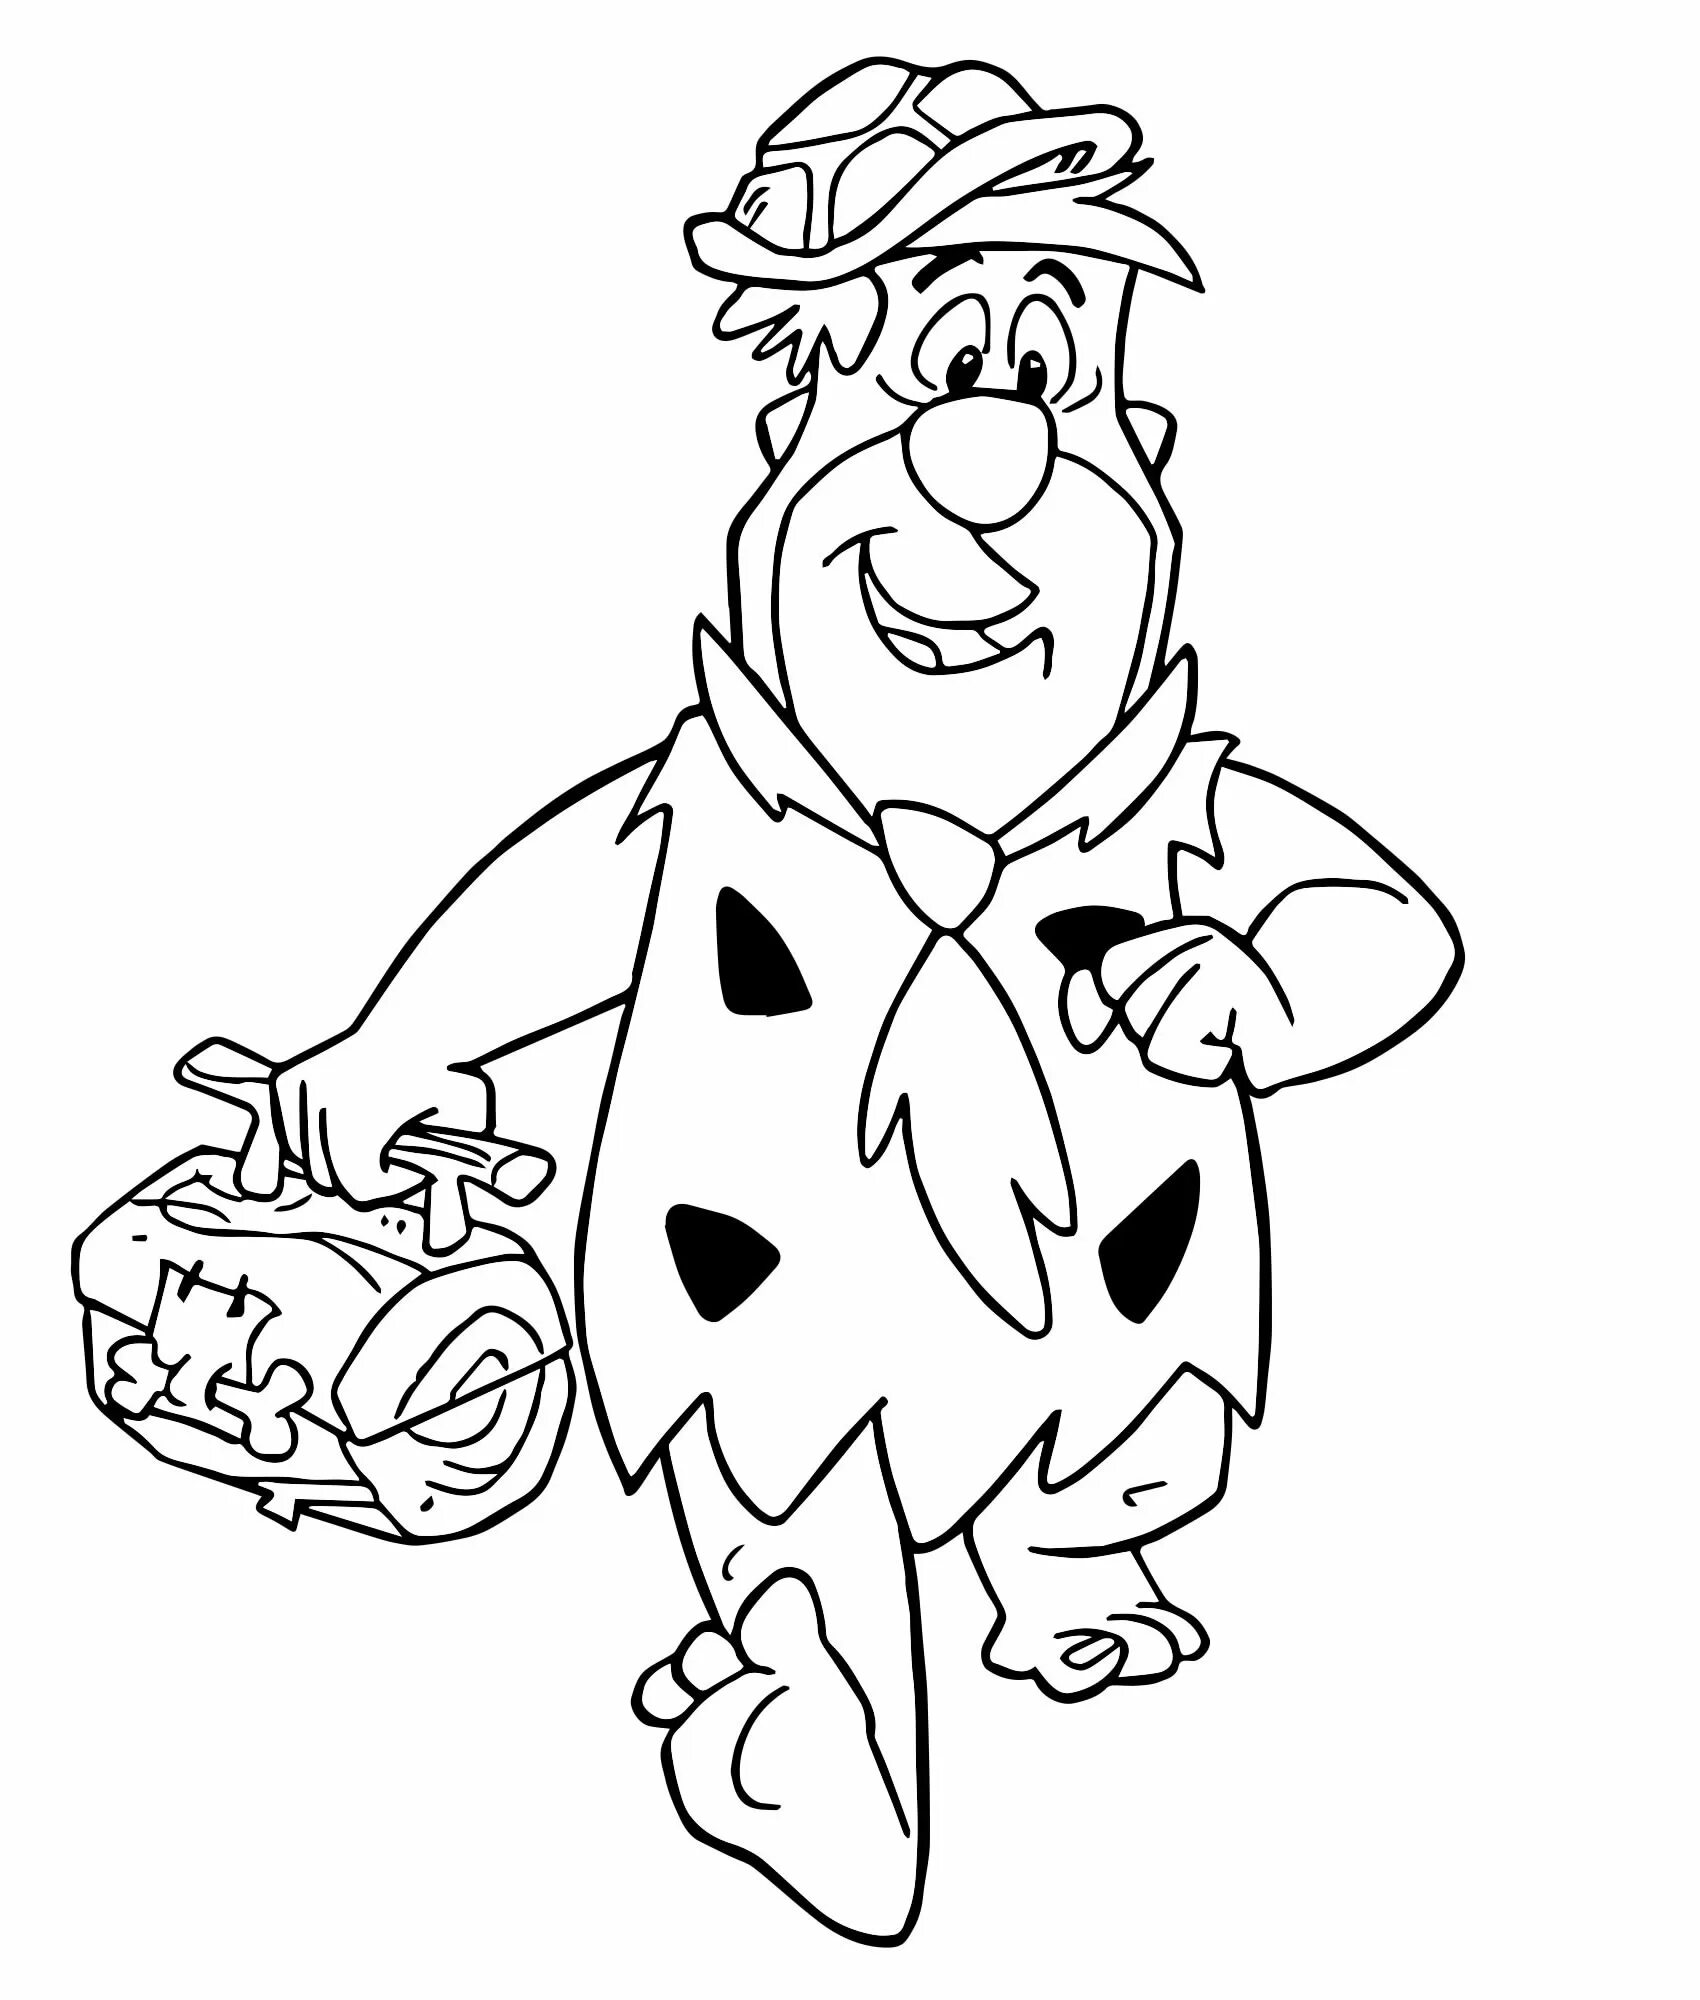 Coloring book shiny fred flintstone